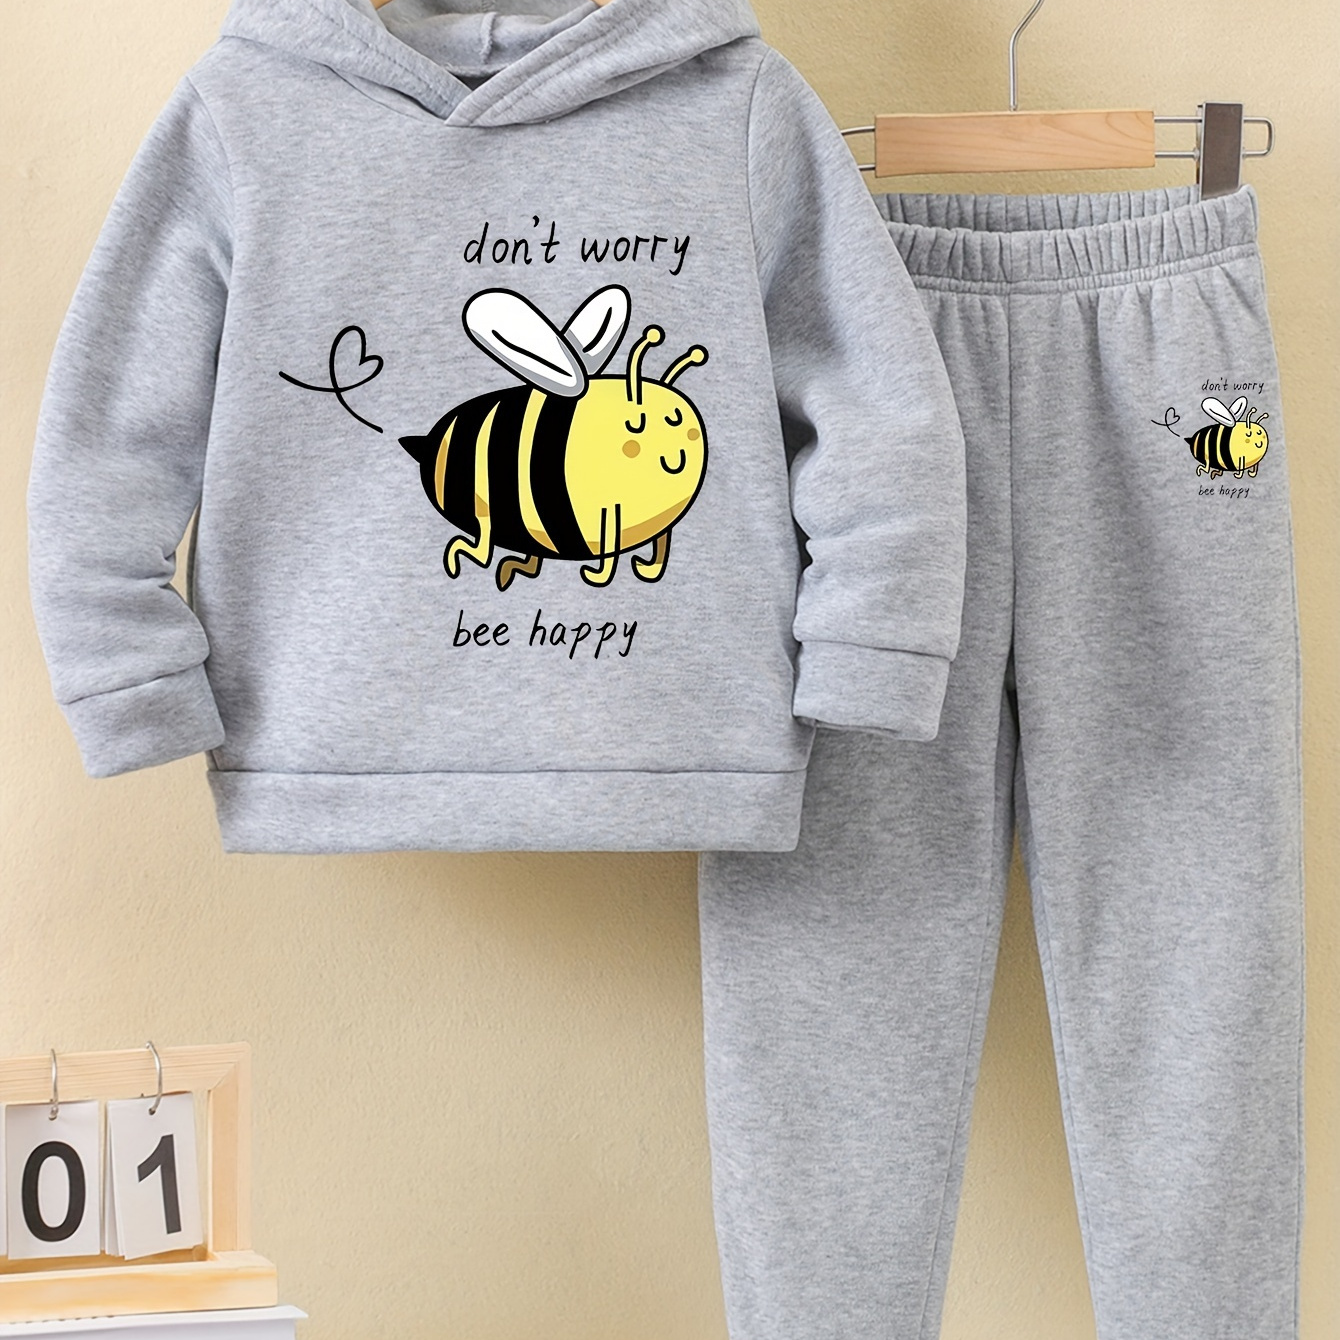 

Girl's Pink Hoodie And Leggings Set: Don't Worry, Bee Happy - Perfect For Fall/winter - Age 12 And Under - Polyester Blend - Random Print Design